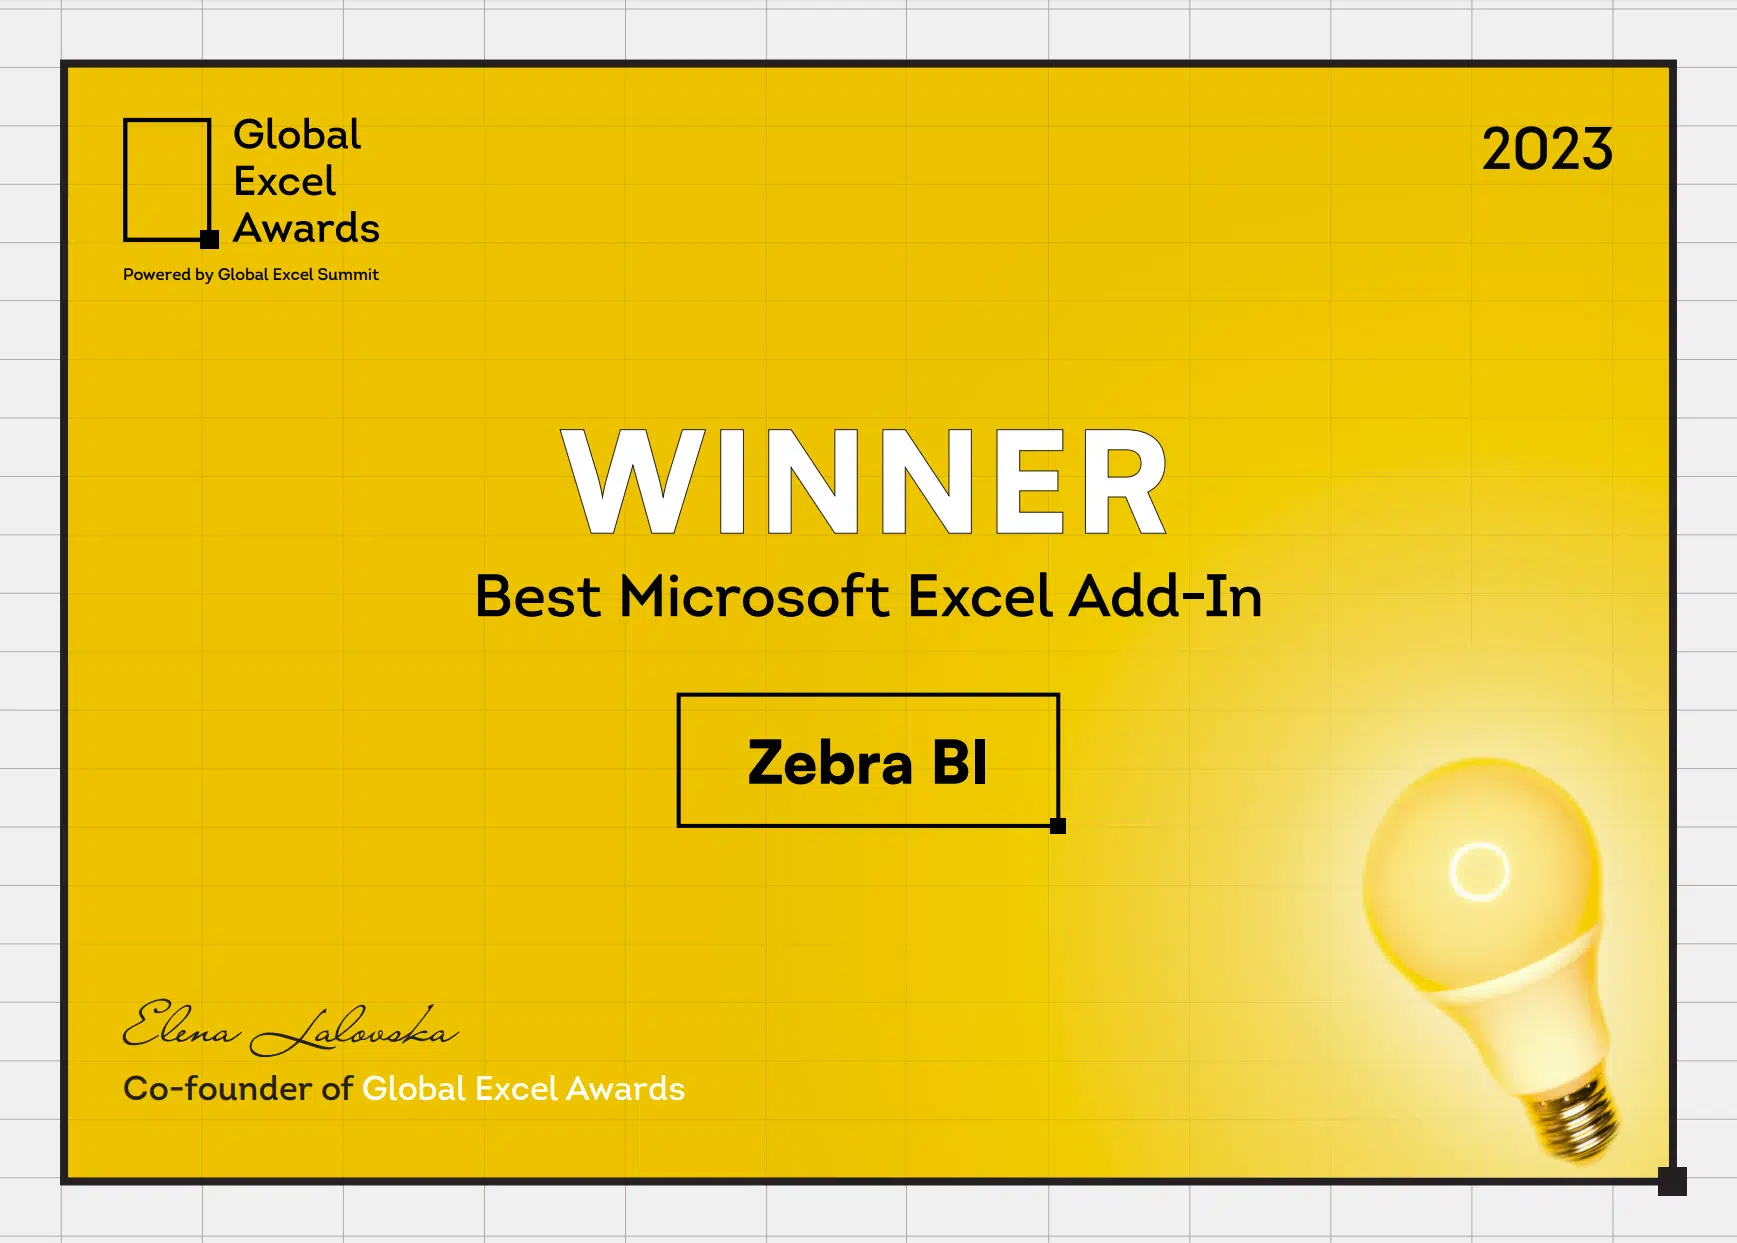 Best Excel add-in certificate won by Zebra BI - at Global Excel Awards powered by Global Excel Summit